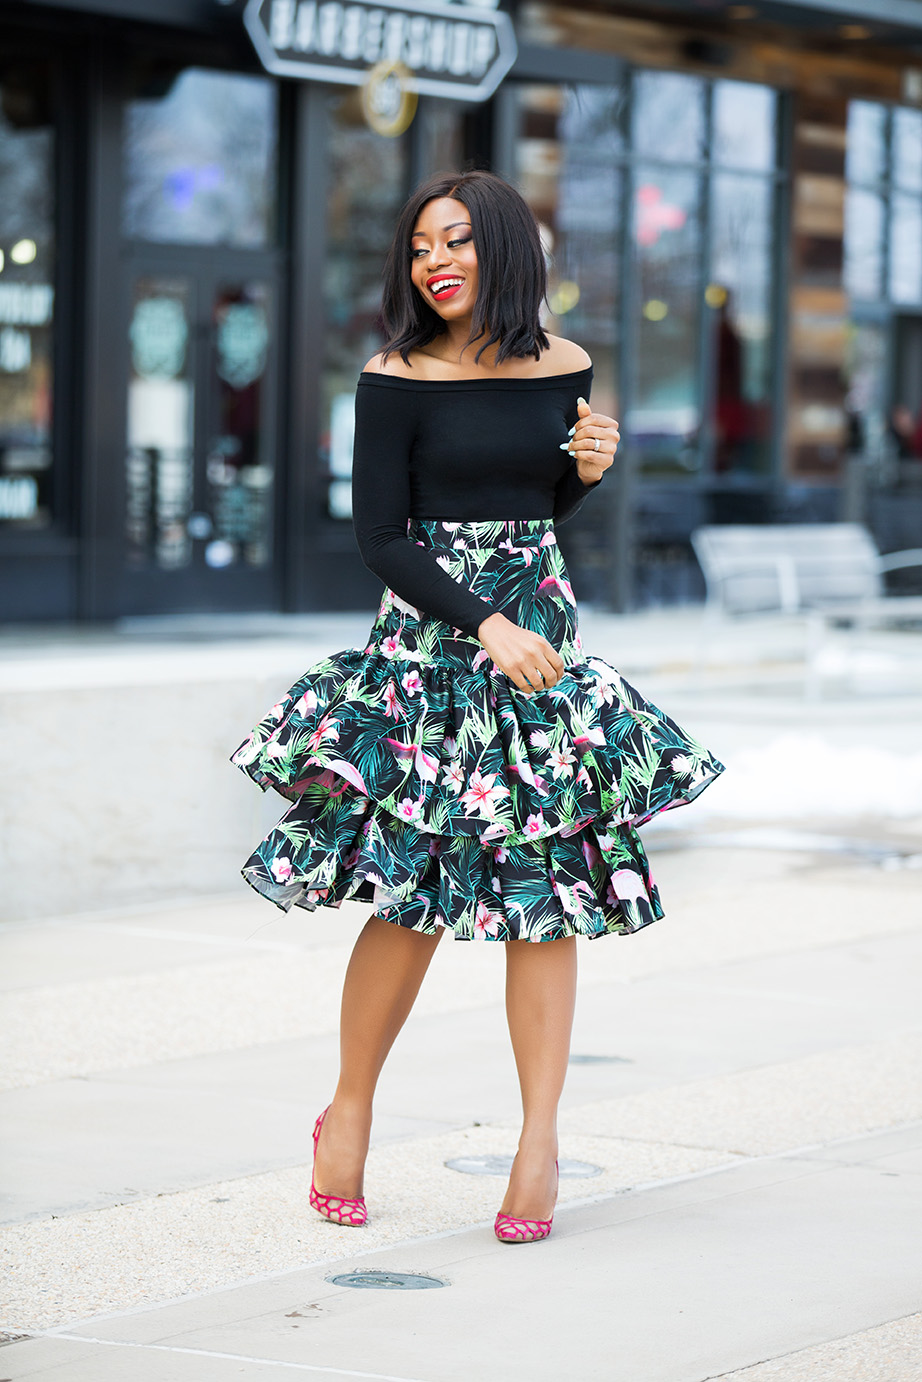 The 3 Skirts That Will Transform Your Work Wardrobe - FPN